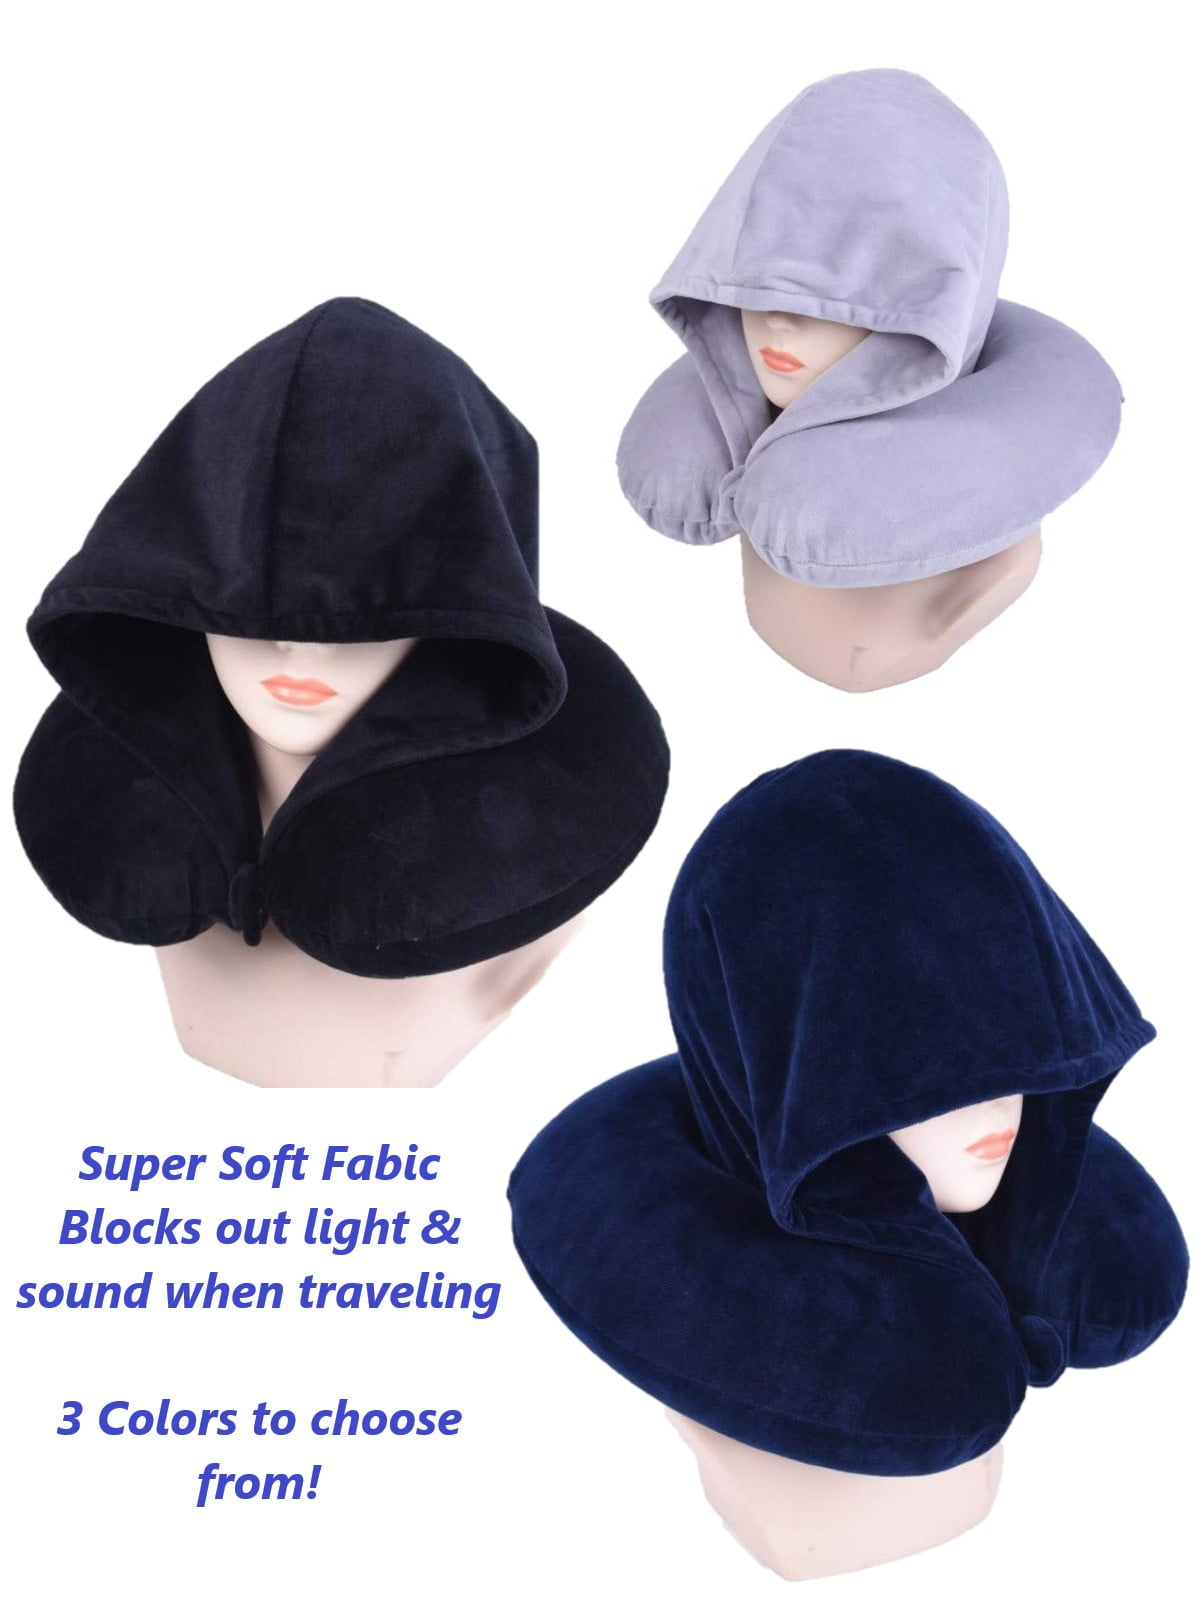 Luxury Plush Hooded Travel Neck Pillow Flight Cushion Support With Hood 